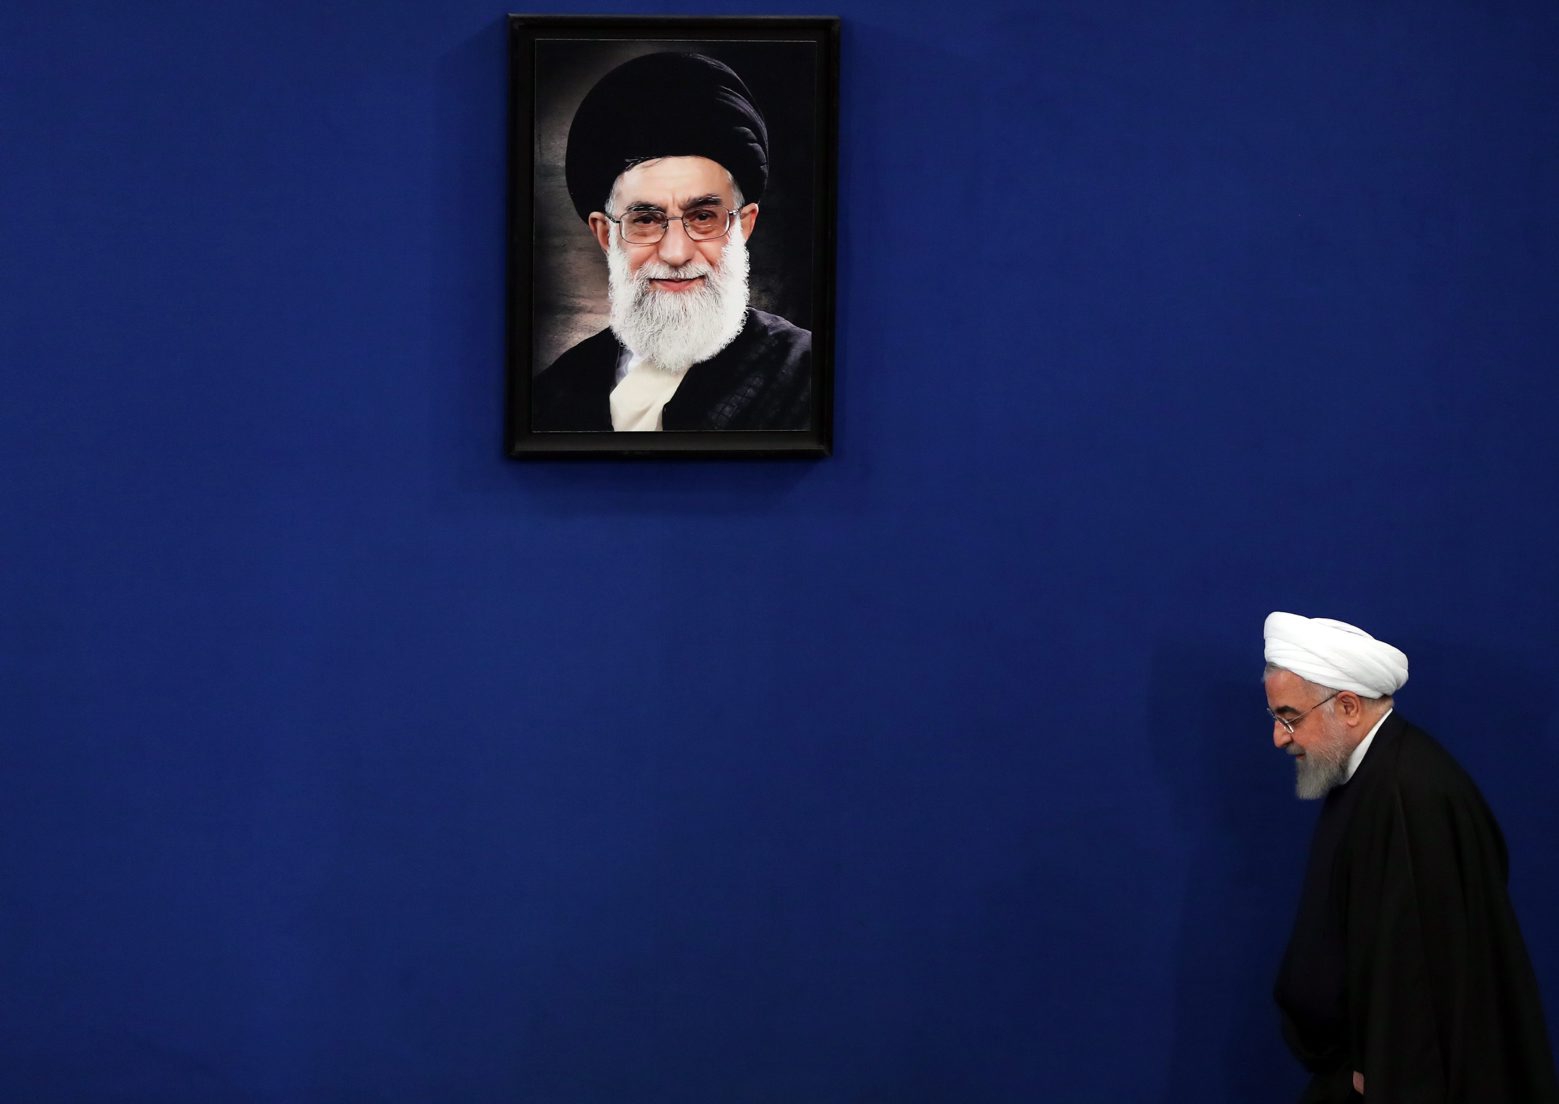 epa08222022 Iranian President Hassan Rouhani walks next to a picture of Iranian supreme leader Ayatollah Ali Khamenei, upon arrival for a press conference in Tehran, Iran, 16 February 2020.  EPA/ABEDIN TAHERKENAREH IRAN ROUHANI PRESS CONFERENCE